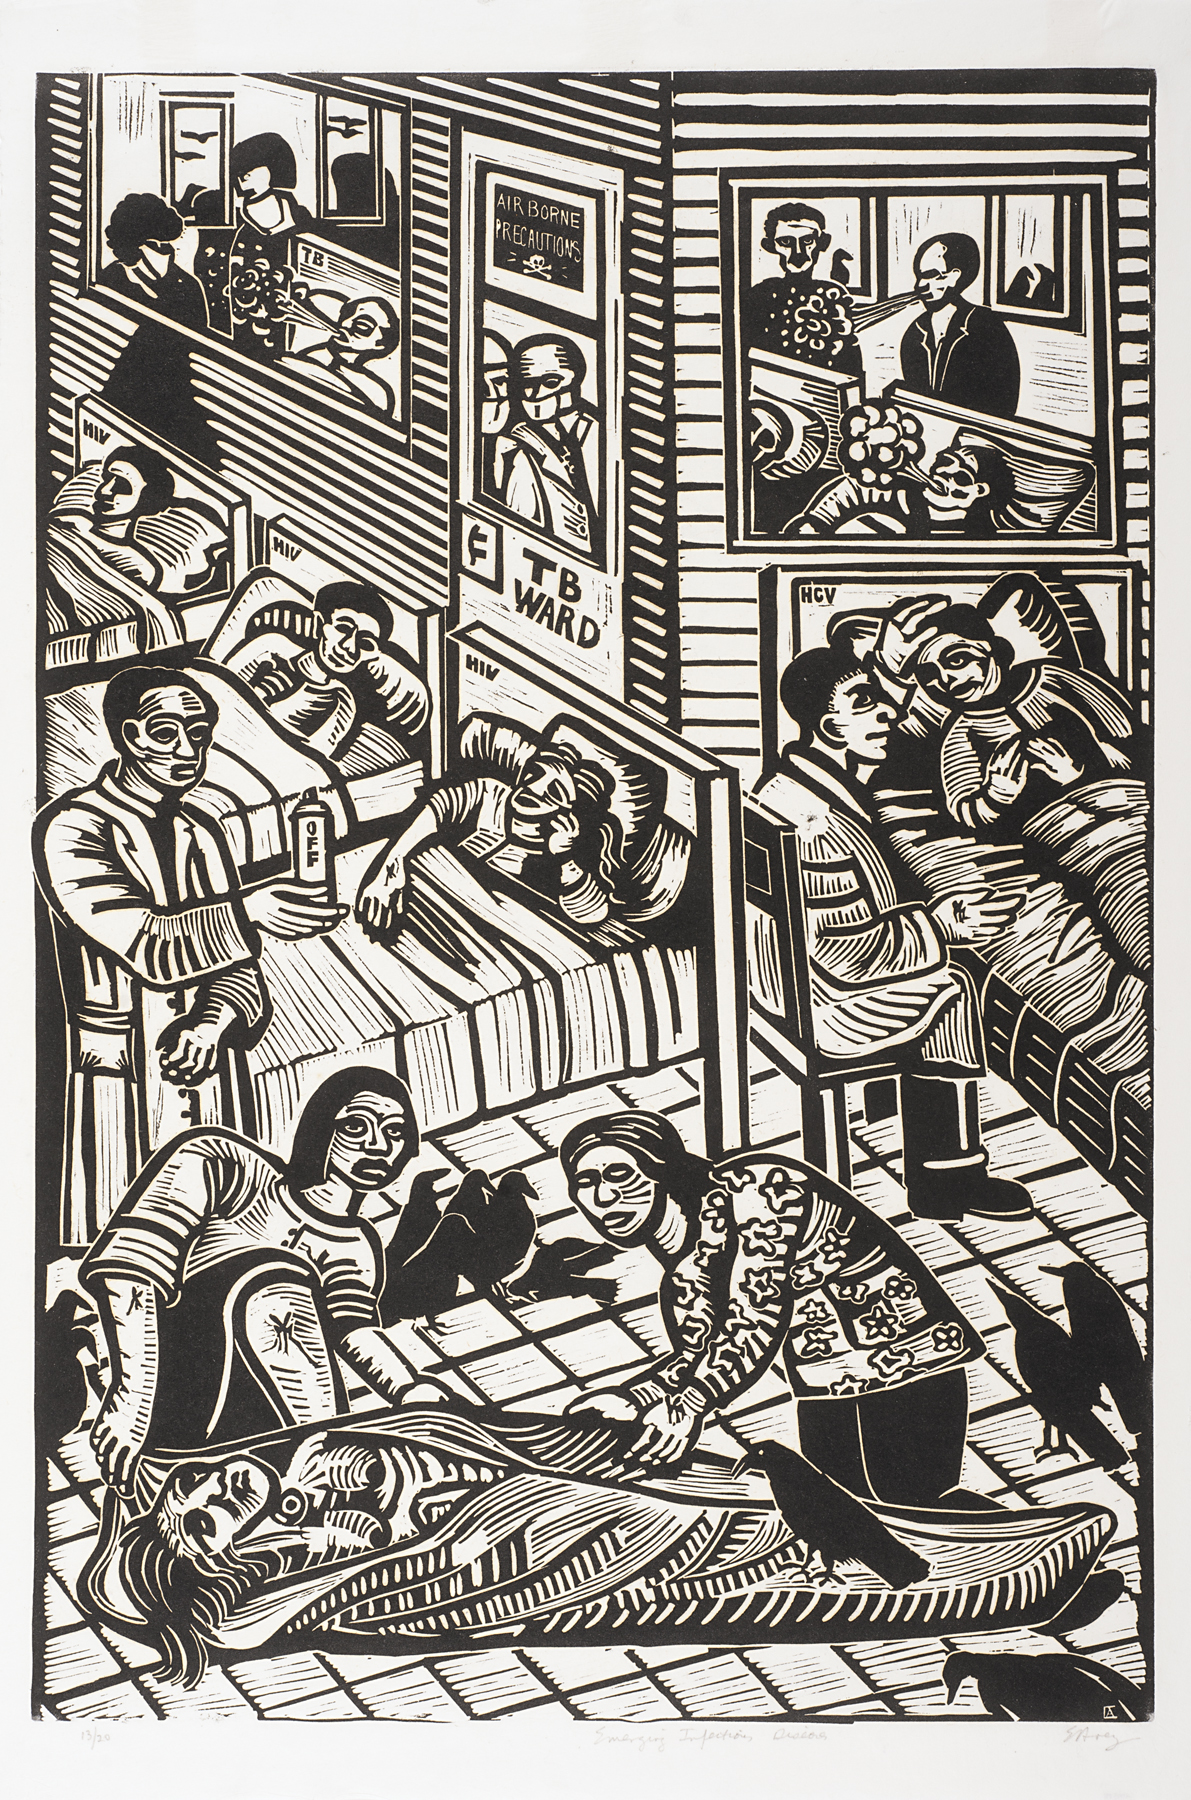 A crowded room hospital room identified by a sign as the “TB WARD” is depicted in black-and-white with dramatic lines. Doctors attend to the patients laying in beds. In the foreground, a deceased woman is being wrapped in a sheet. Several black birds surround her and the figures wrapping the body.